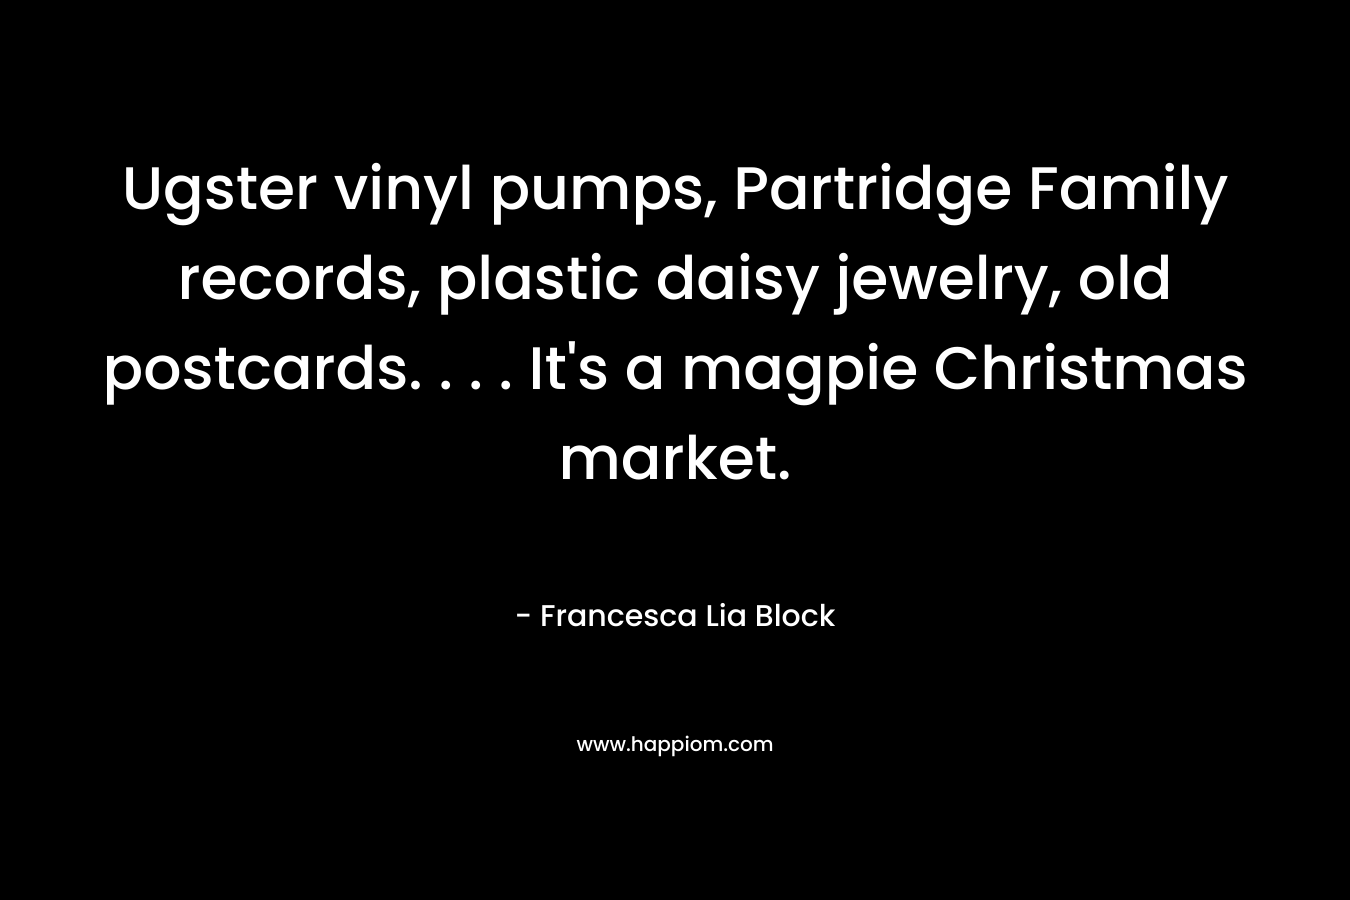 Ugster vinyl pumps, Partridge Family records, plastic daisy jewelry, old postcards. . . . It's a magpie Christmas market.